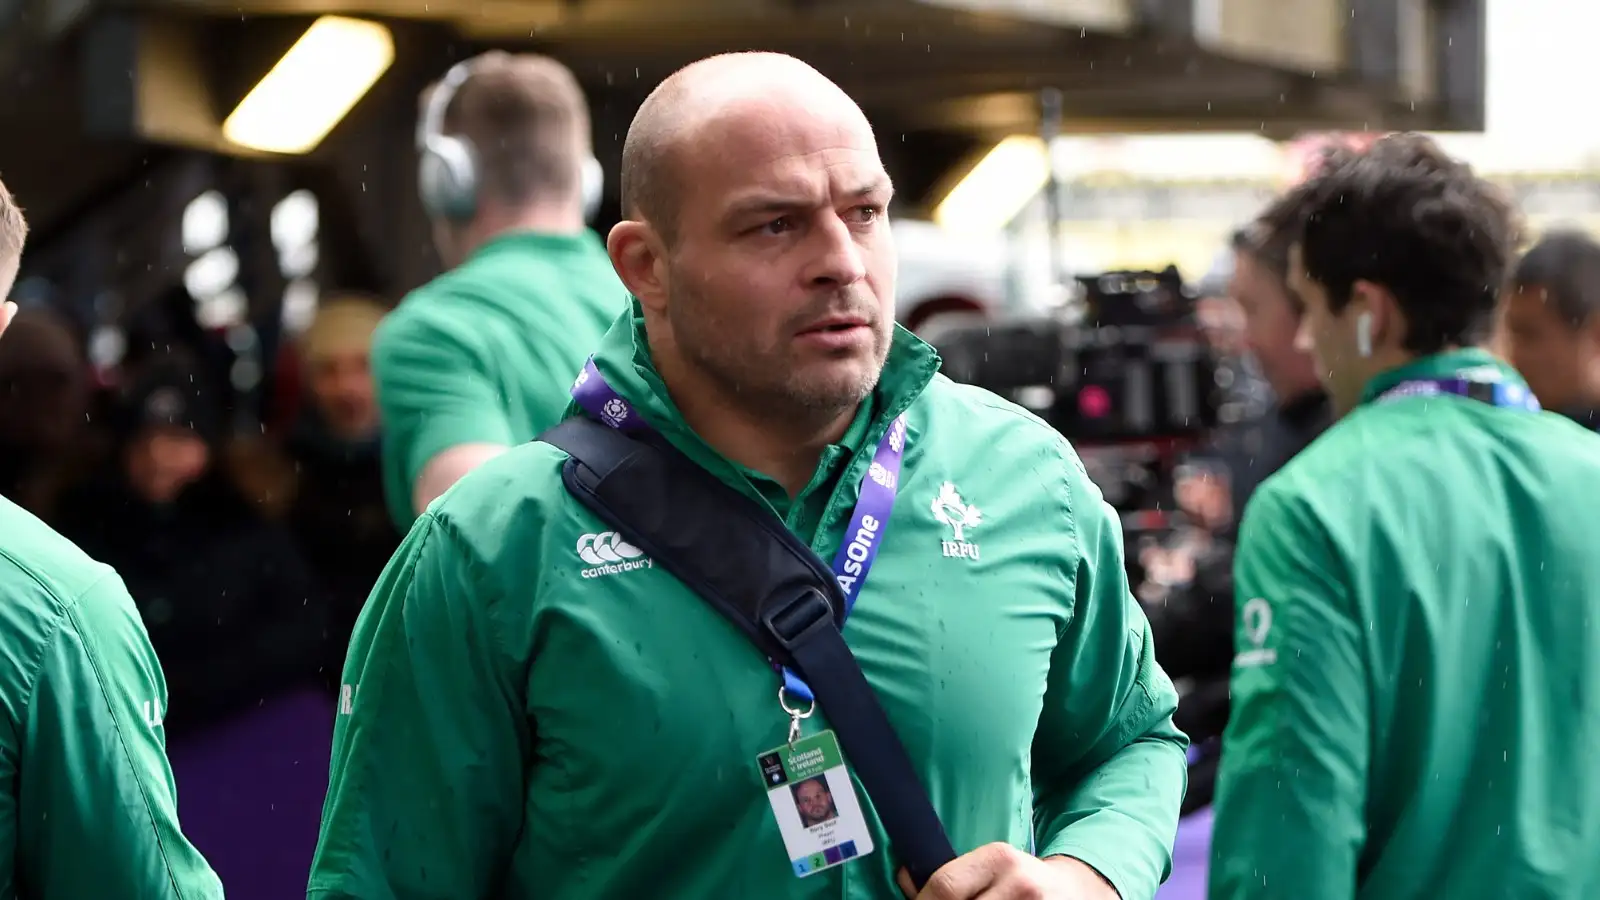 Former Ireland captain Rory Best has backed his country to challenge for a Six Nations Grand Slam but believes the appointments of Steve Borthwick and Warren Gatland have thrown “a big curveball” ahead of the tournament.